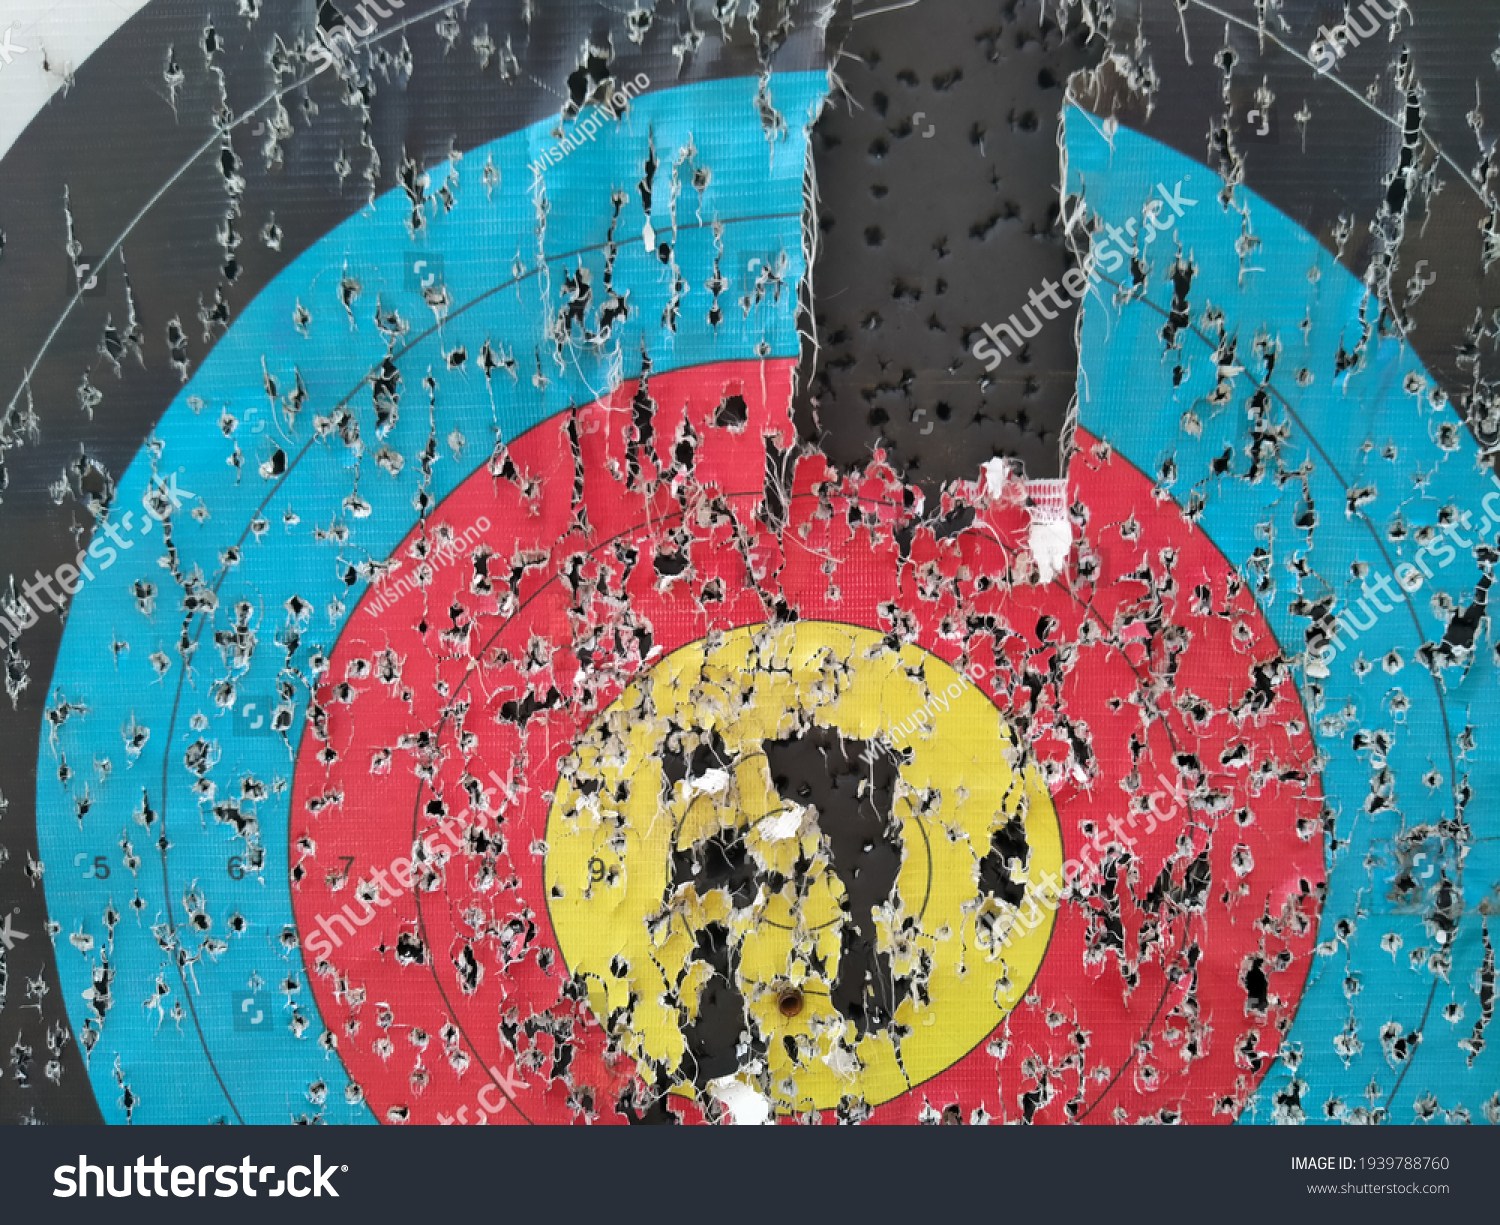 Archery target close up with many arrow holes in Gold, red, blue and black  #1939788760